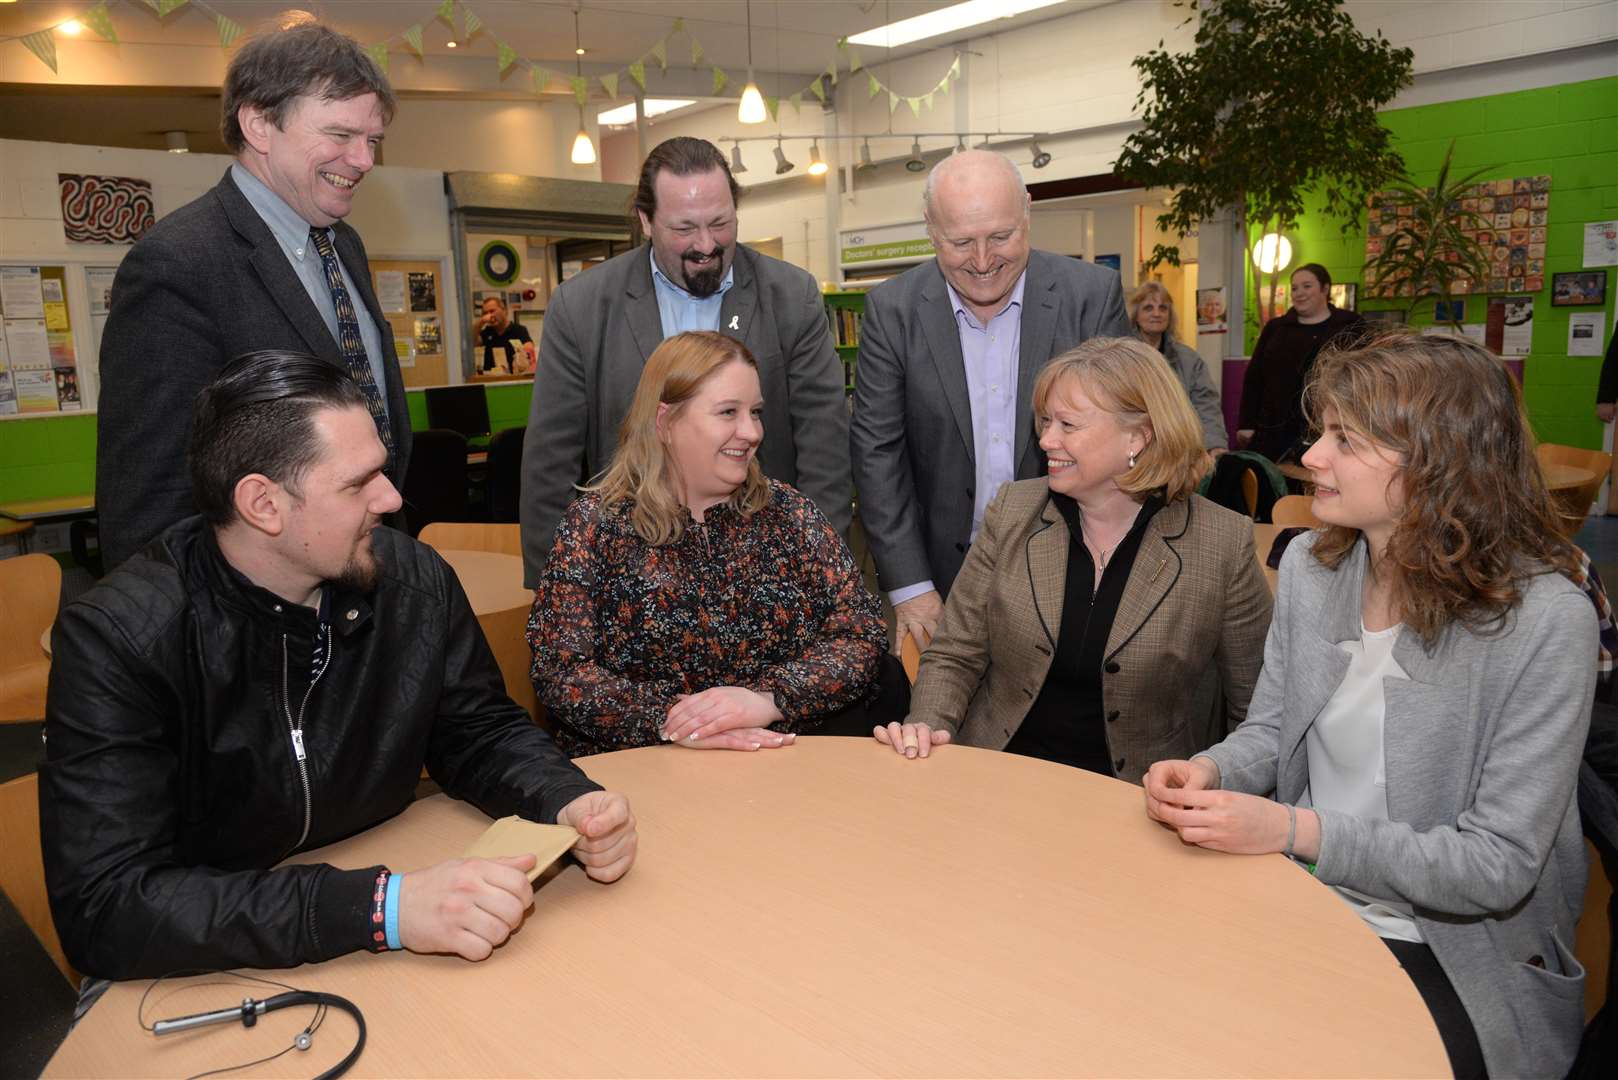 Baroness Smith with James Brooks, Rebecca Tait, Rebecca Dalbon, chairman of trustees Adam Price, leader of the Medway Labour Group Vince Maple and chief executive Steve Clarinbold in the cafe